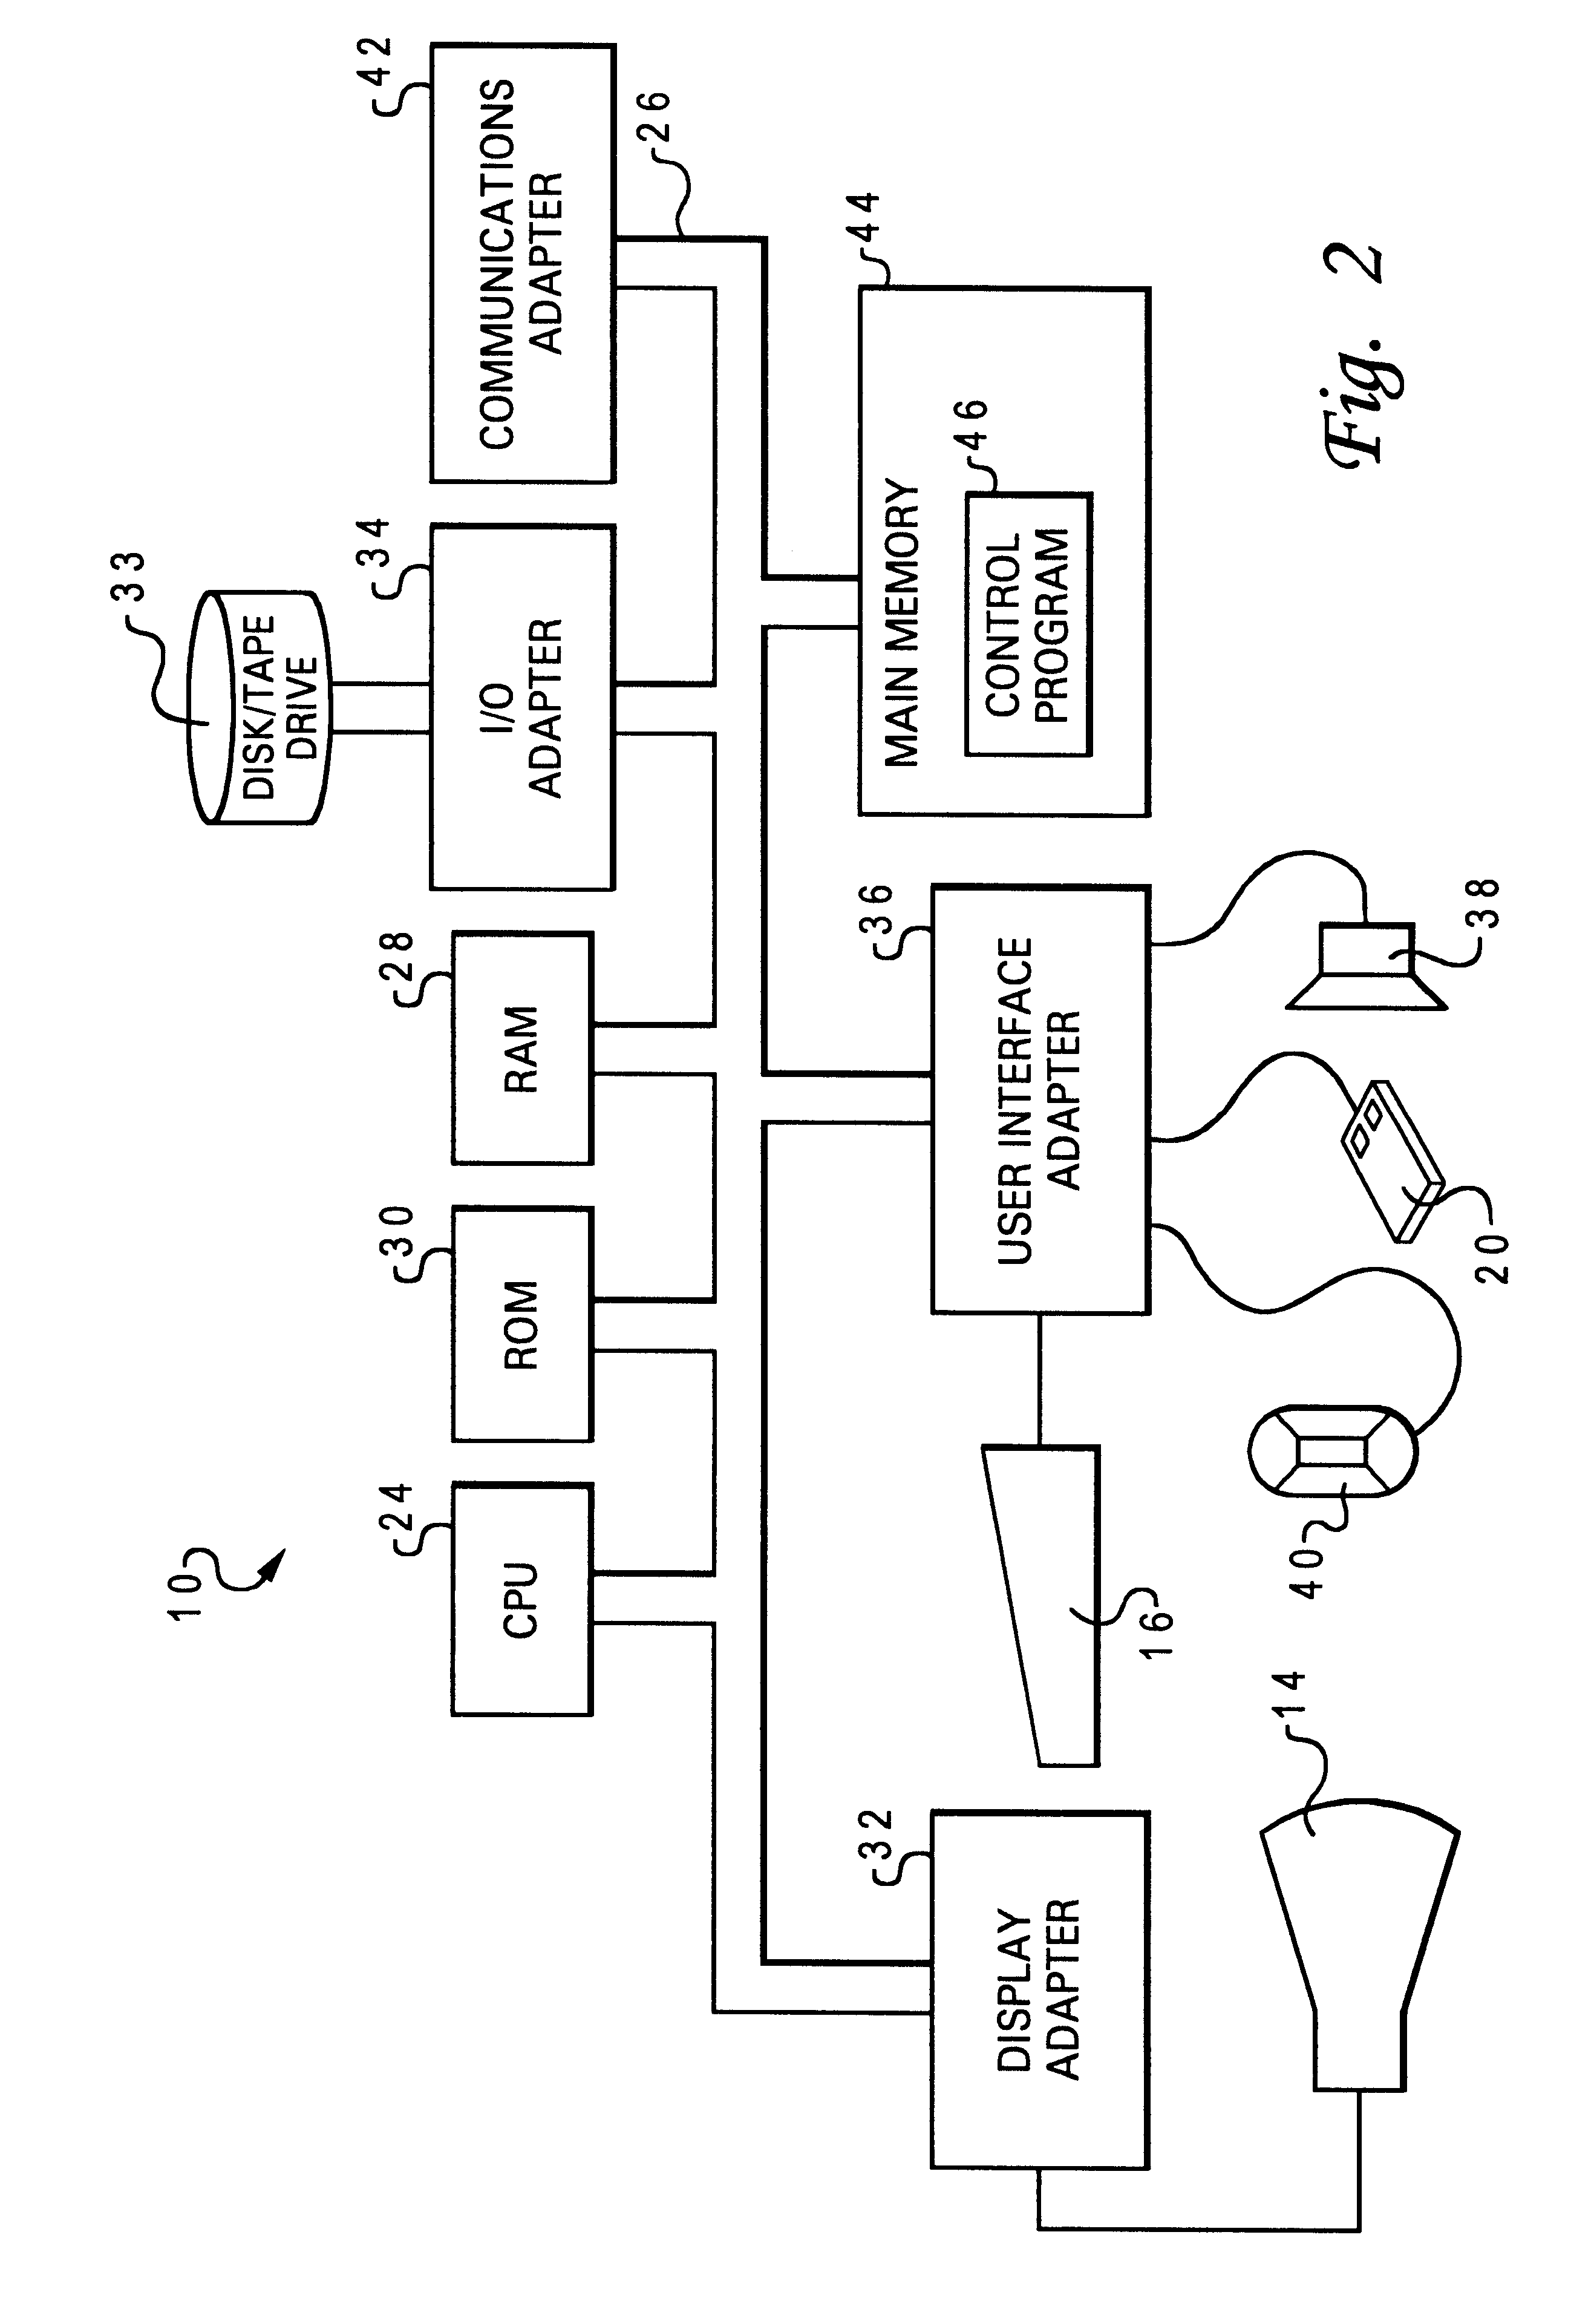 Method and system for counting events within a simulation model